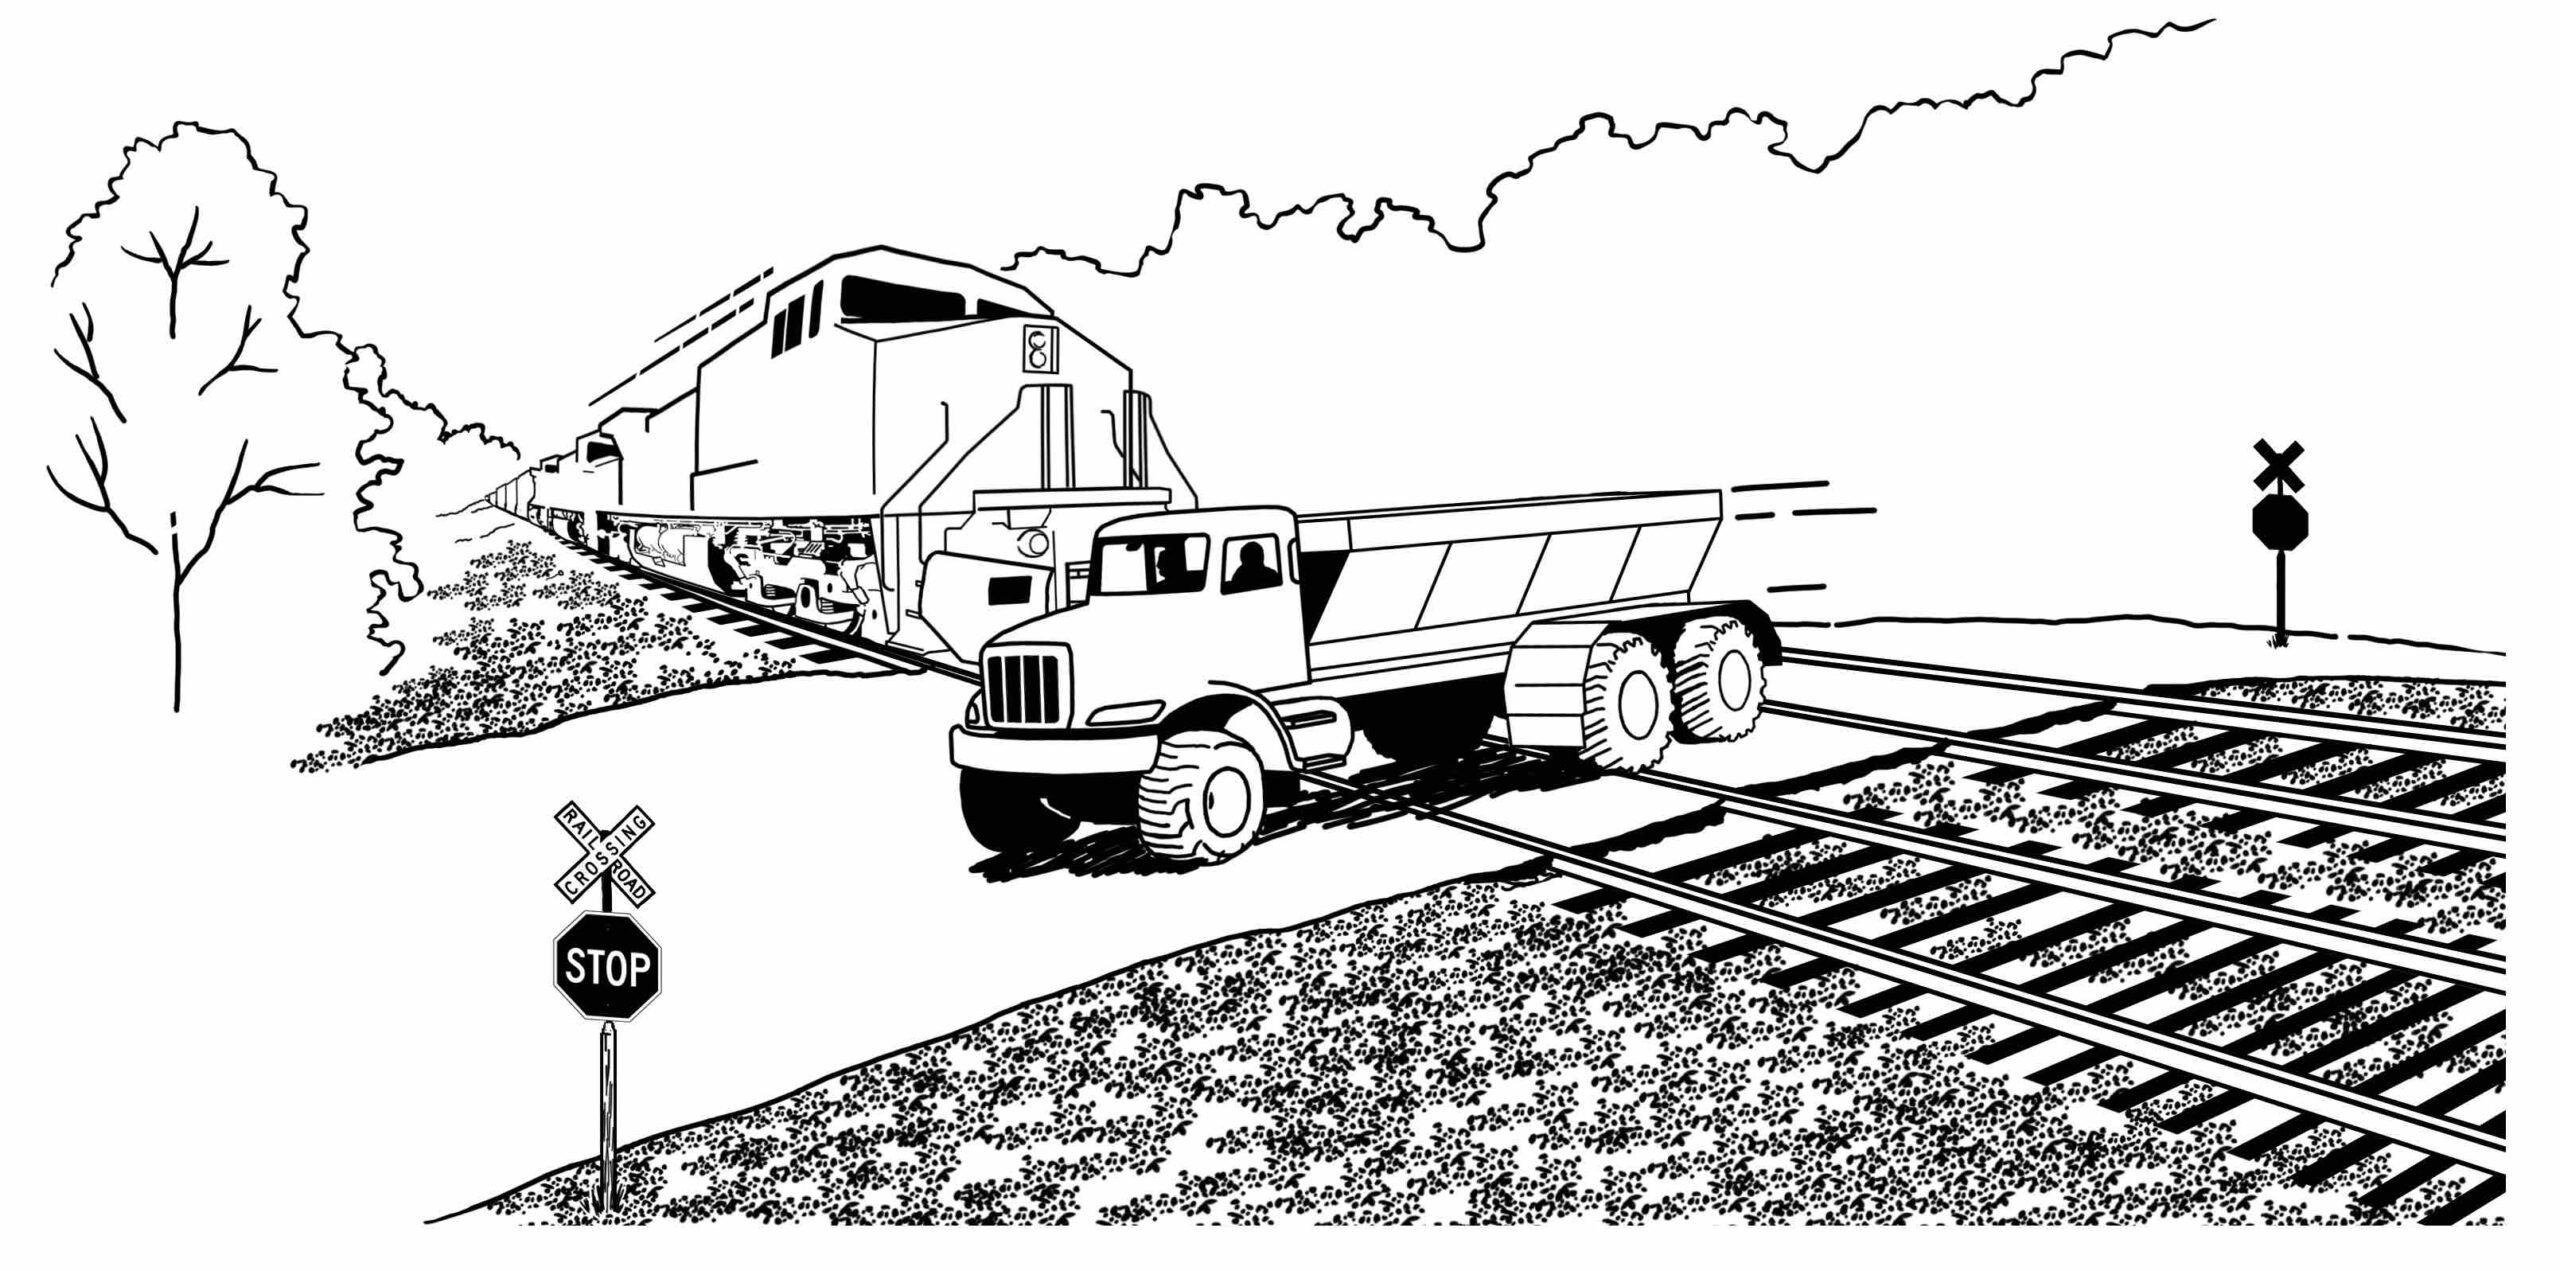 SA-Train-Smashes-into-Compost-Spreader-Truck-Image-scaled Illustration